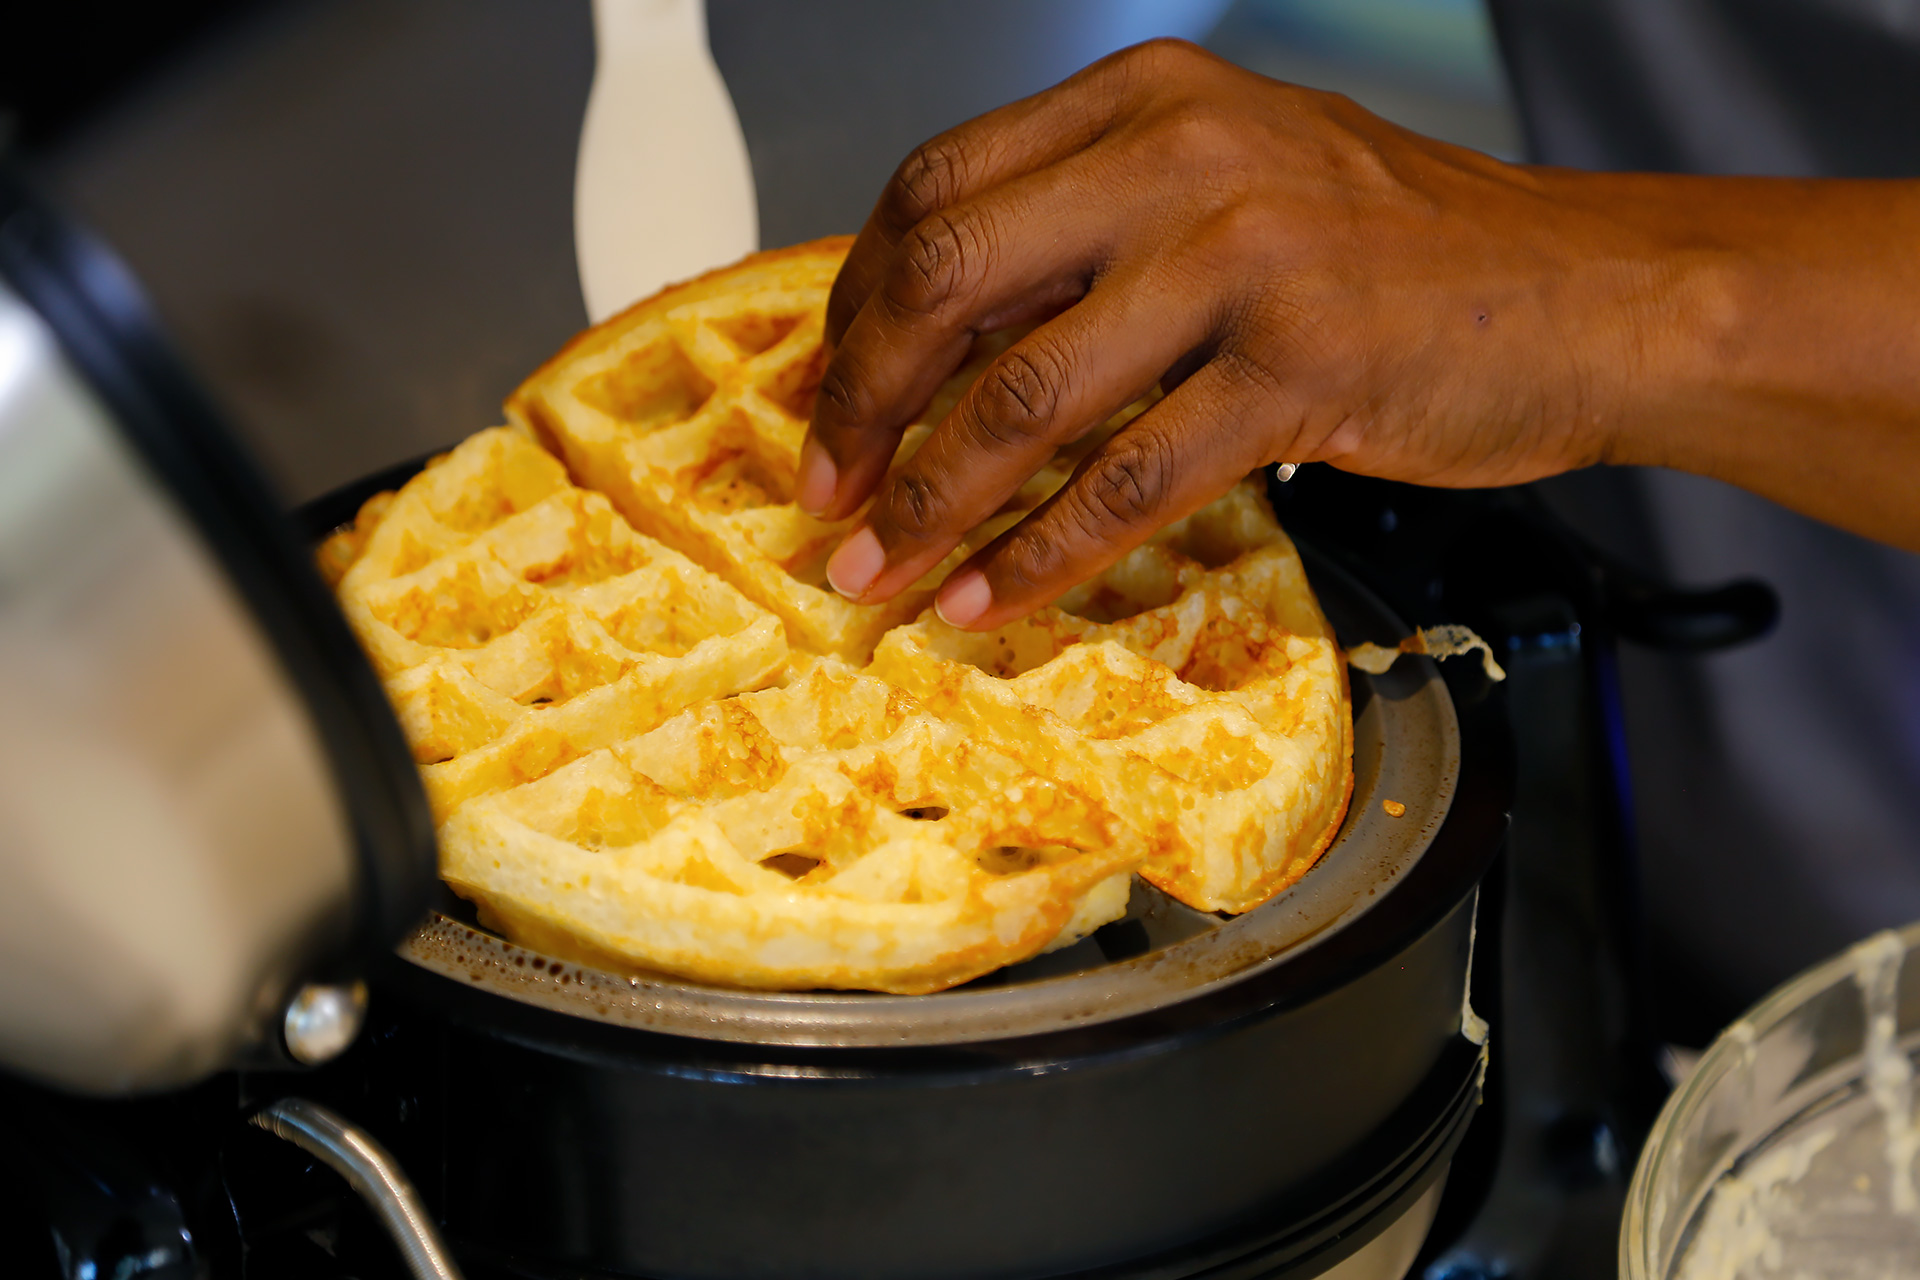  Cook waffles, following manufacturer’s instructions, until golden and cooked through, about 3 minutes.